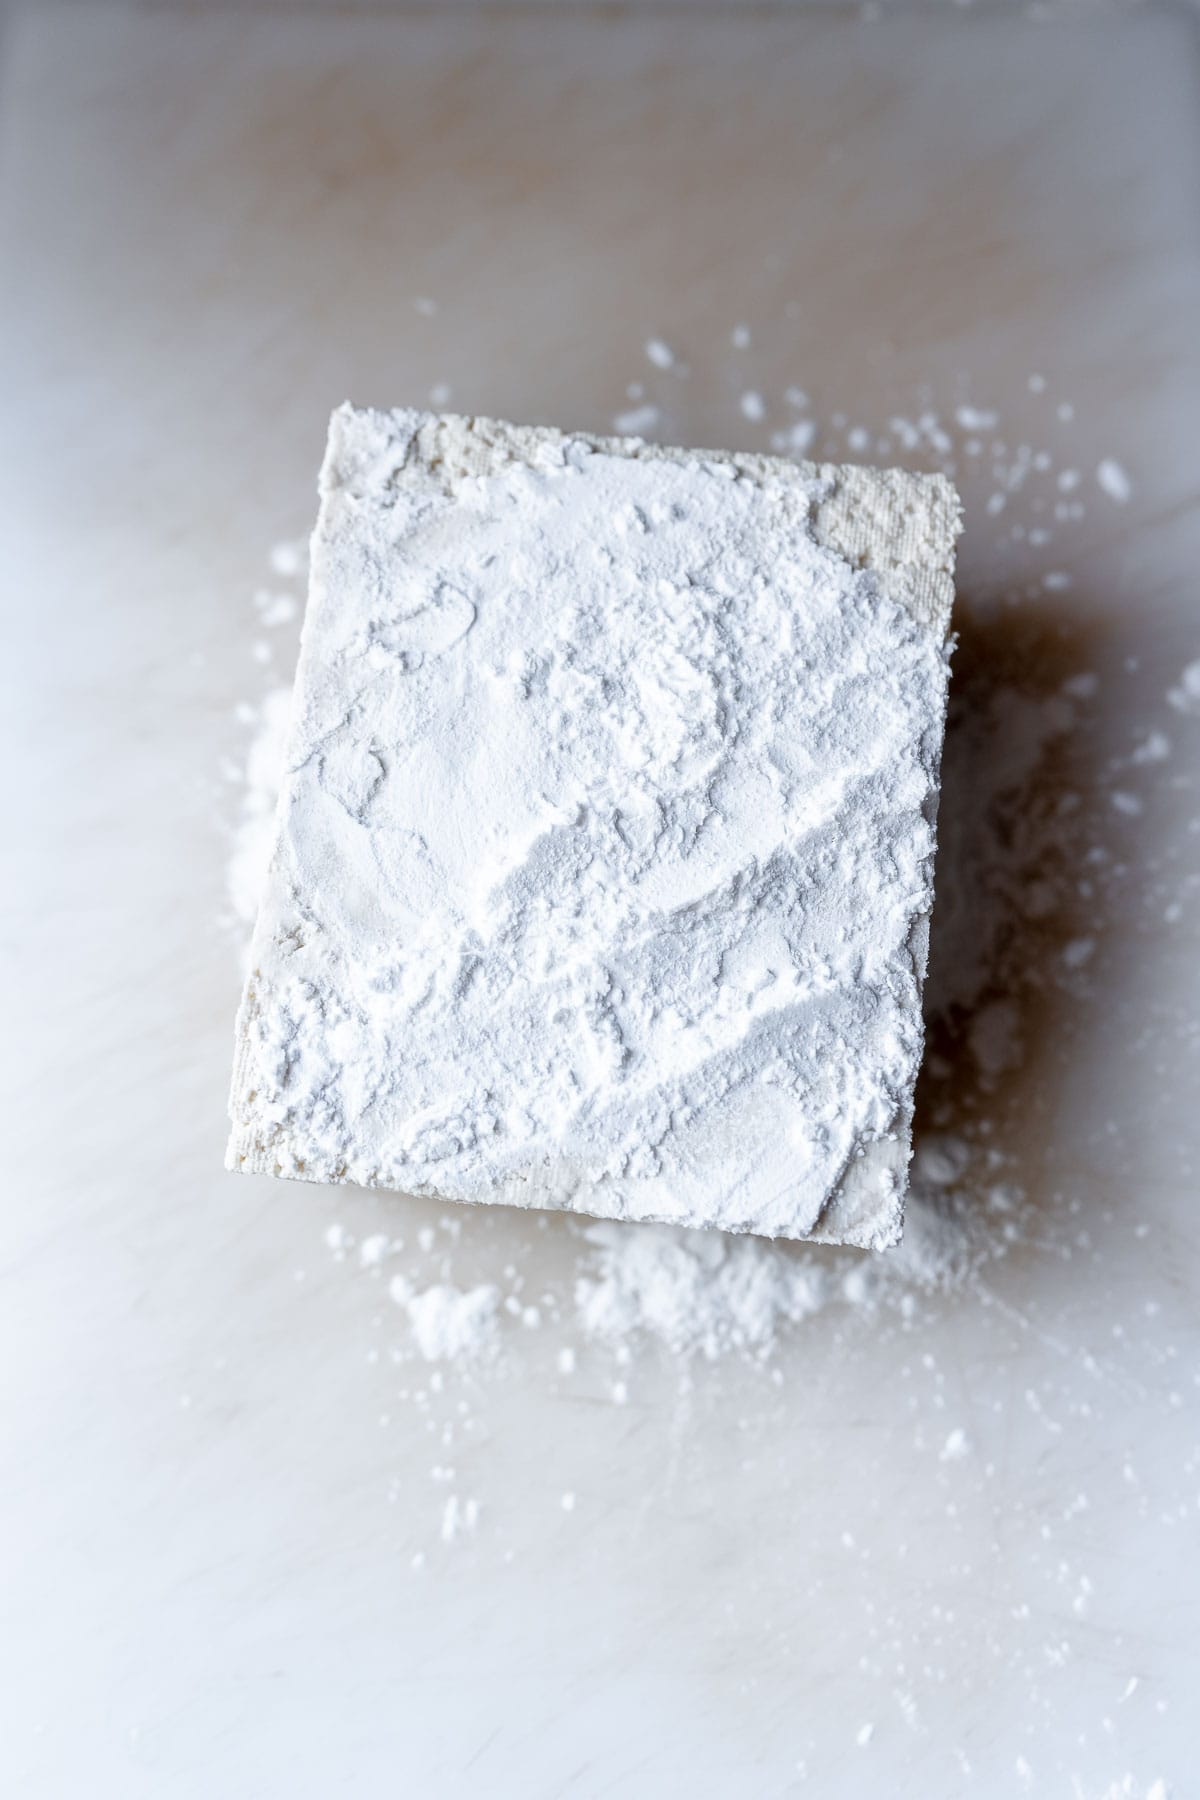 A white block of tofu dusted with flour.